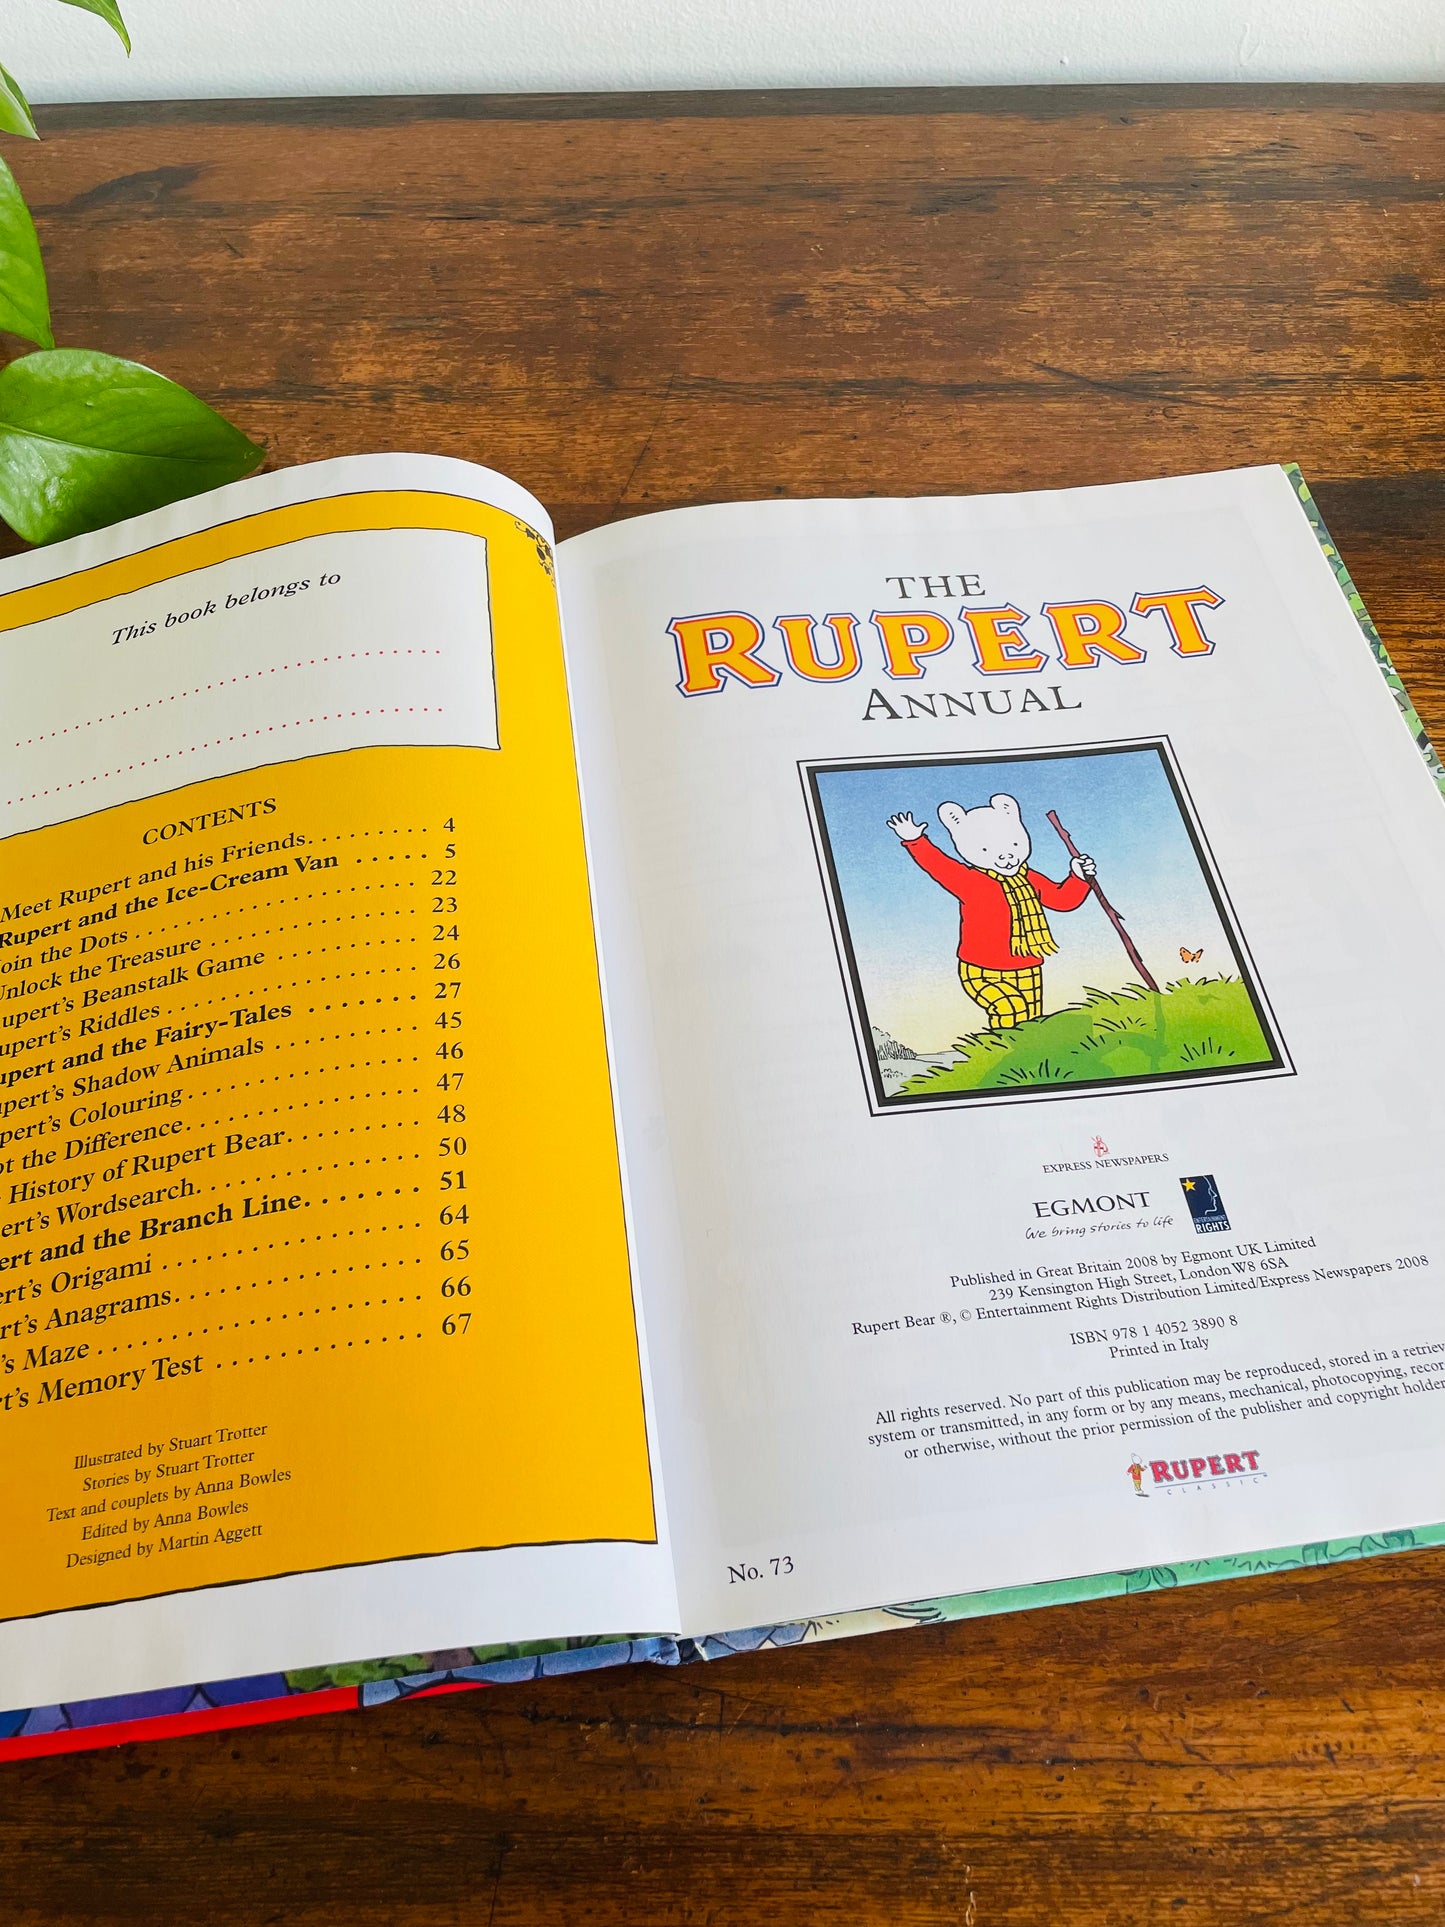 The Rupert Annual (2008) - Hardcover Book